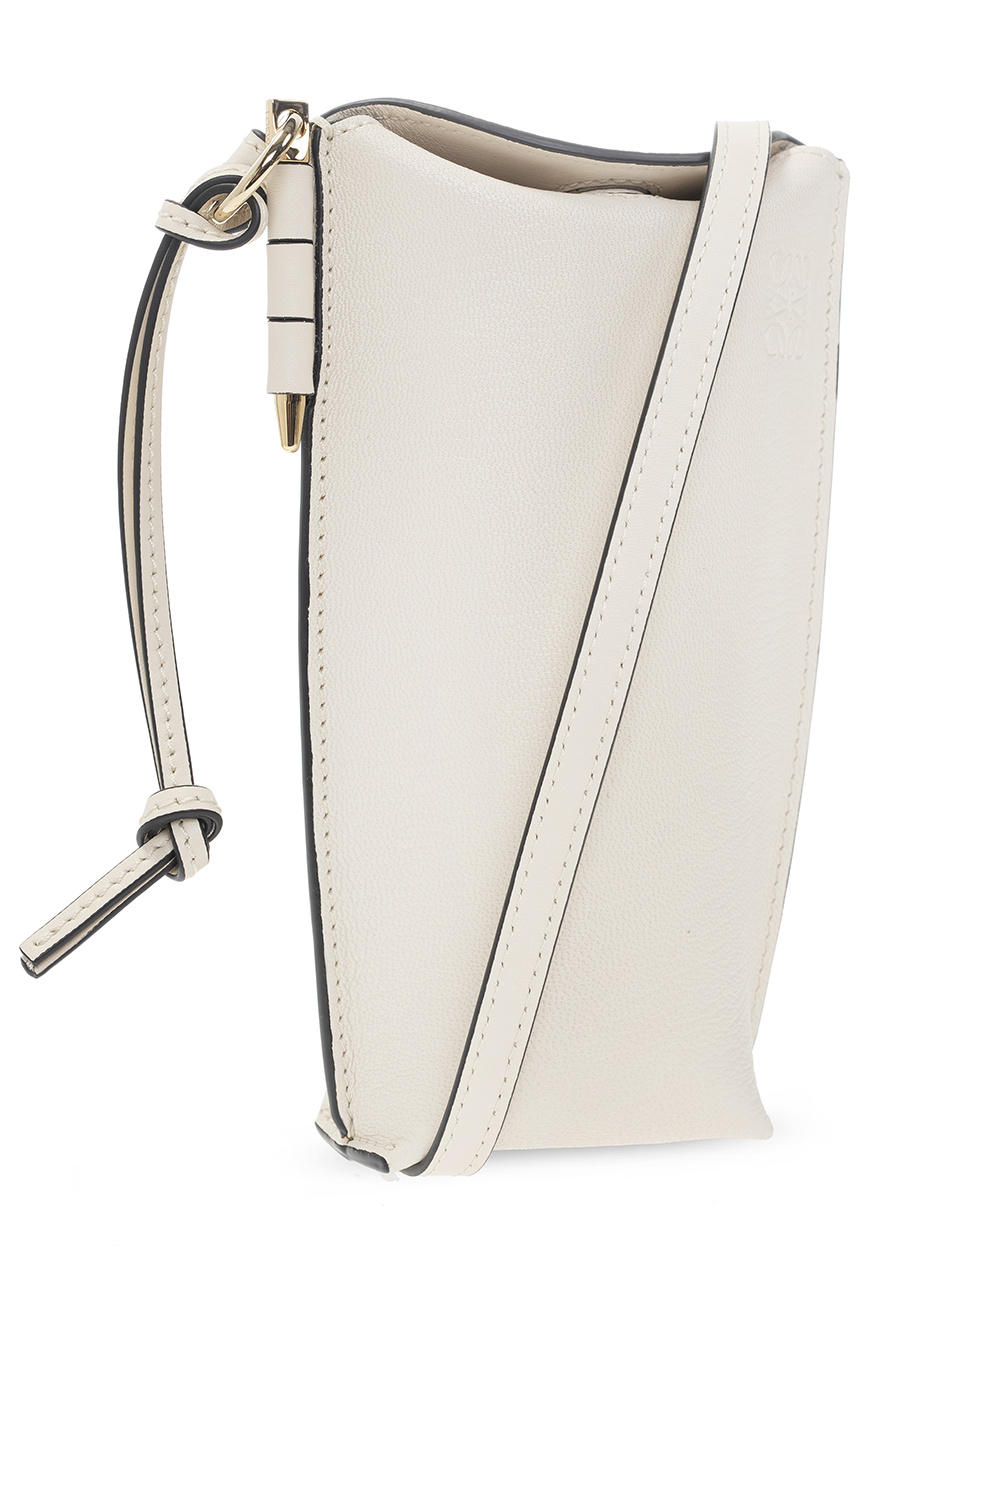 Loewe ‘Gate’ pouch with strap